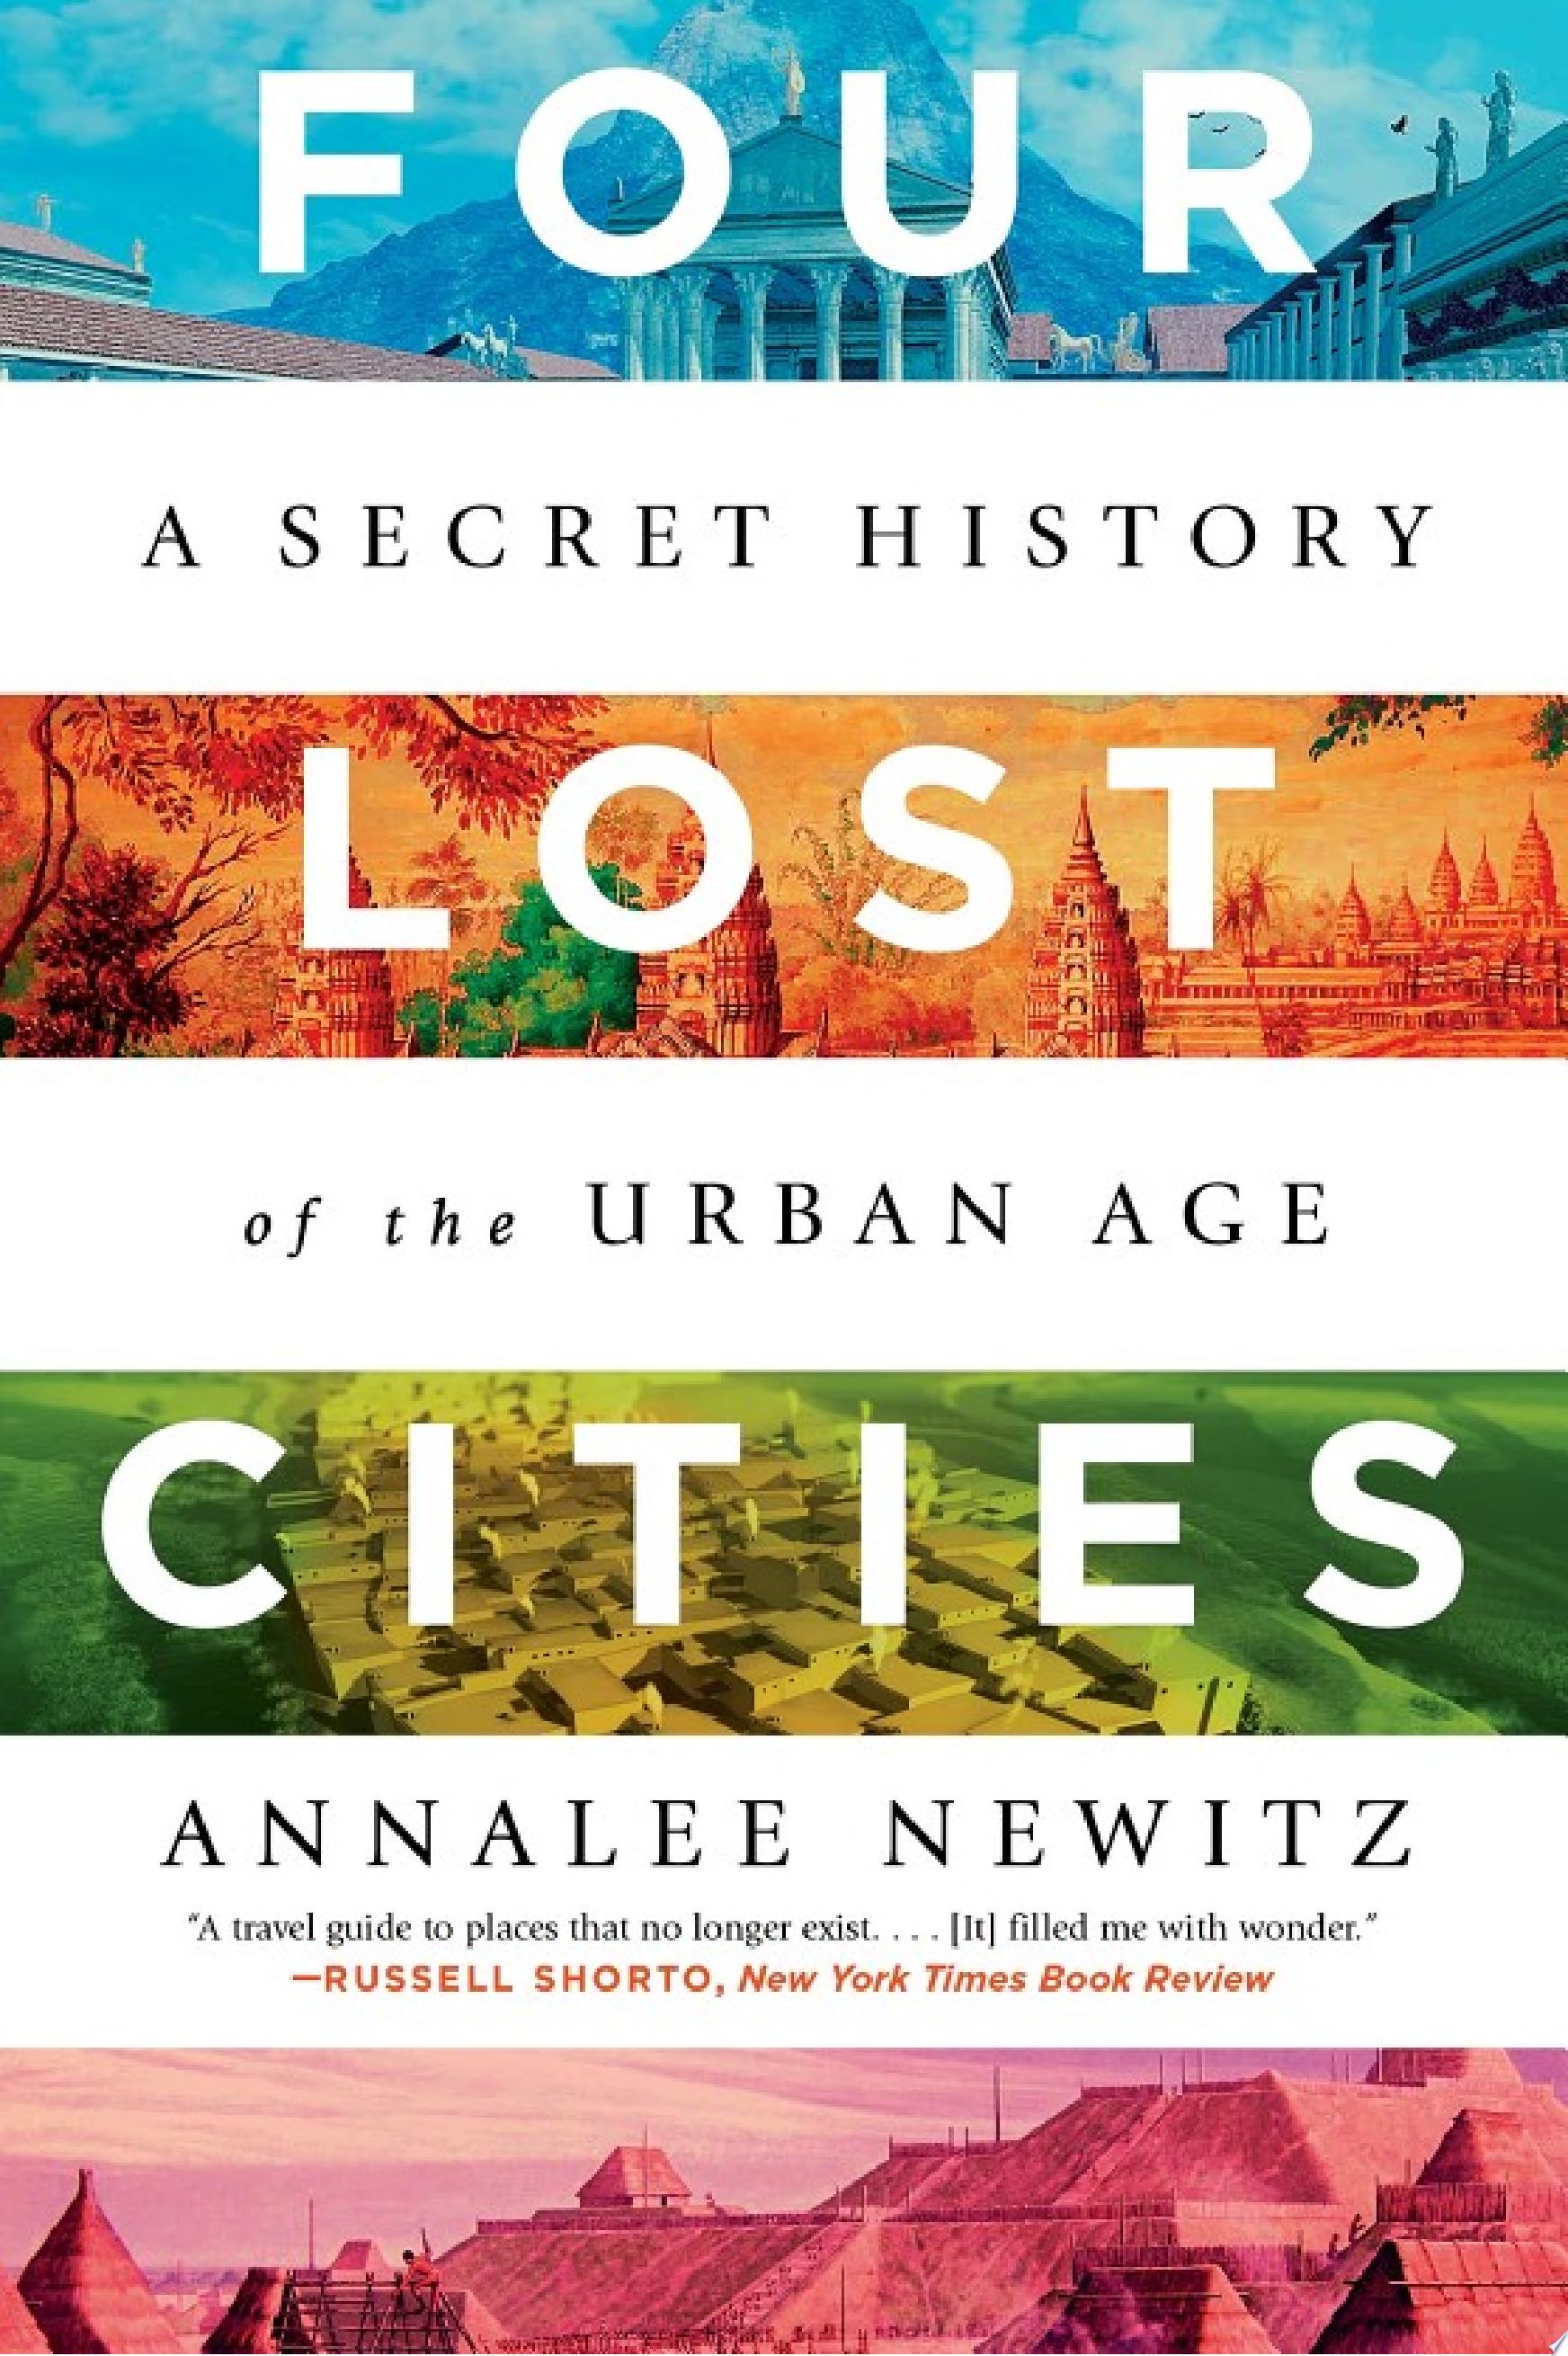 Image for "Four Lost Cities: A Secret History of the Urban Age"